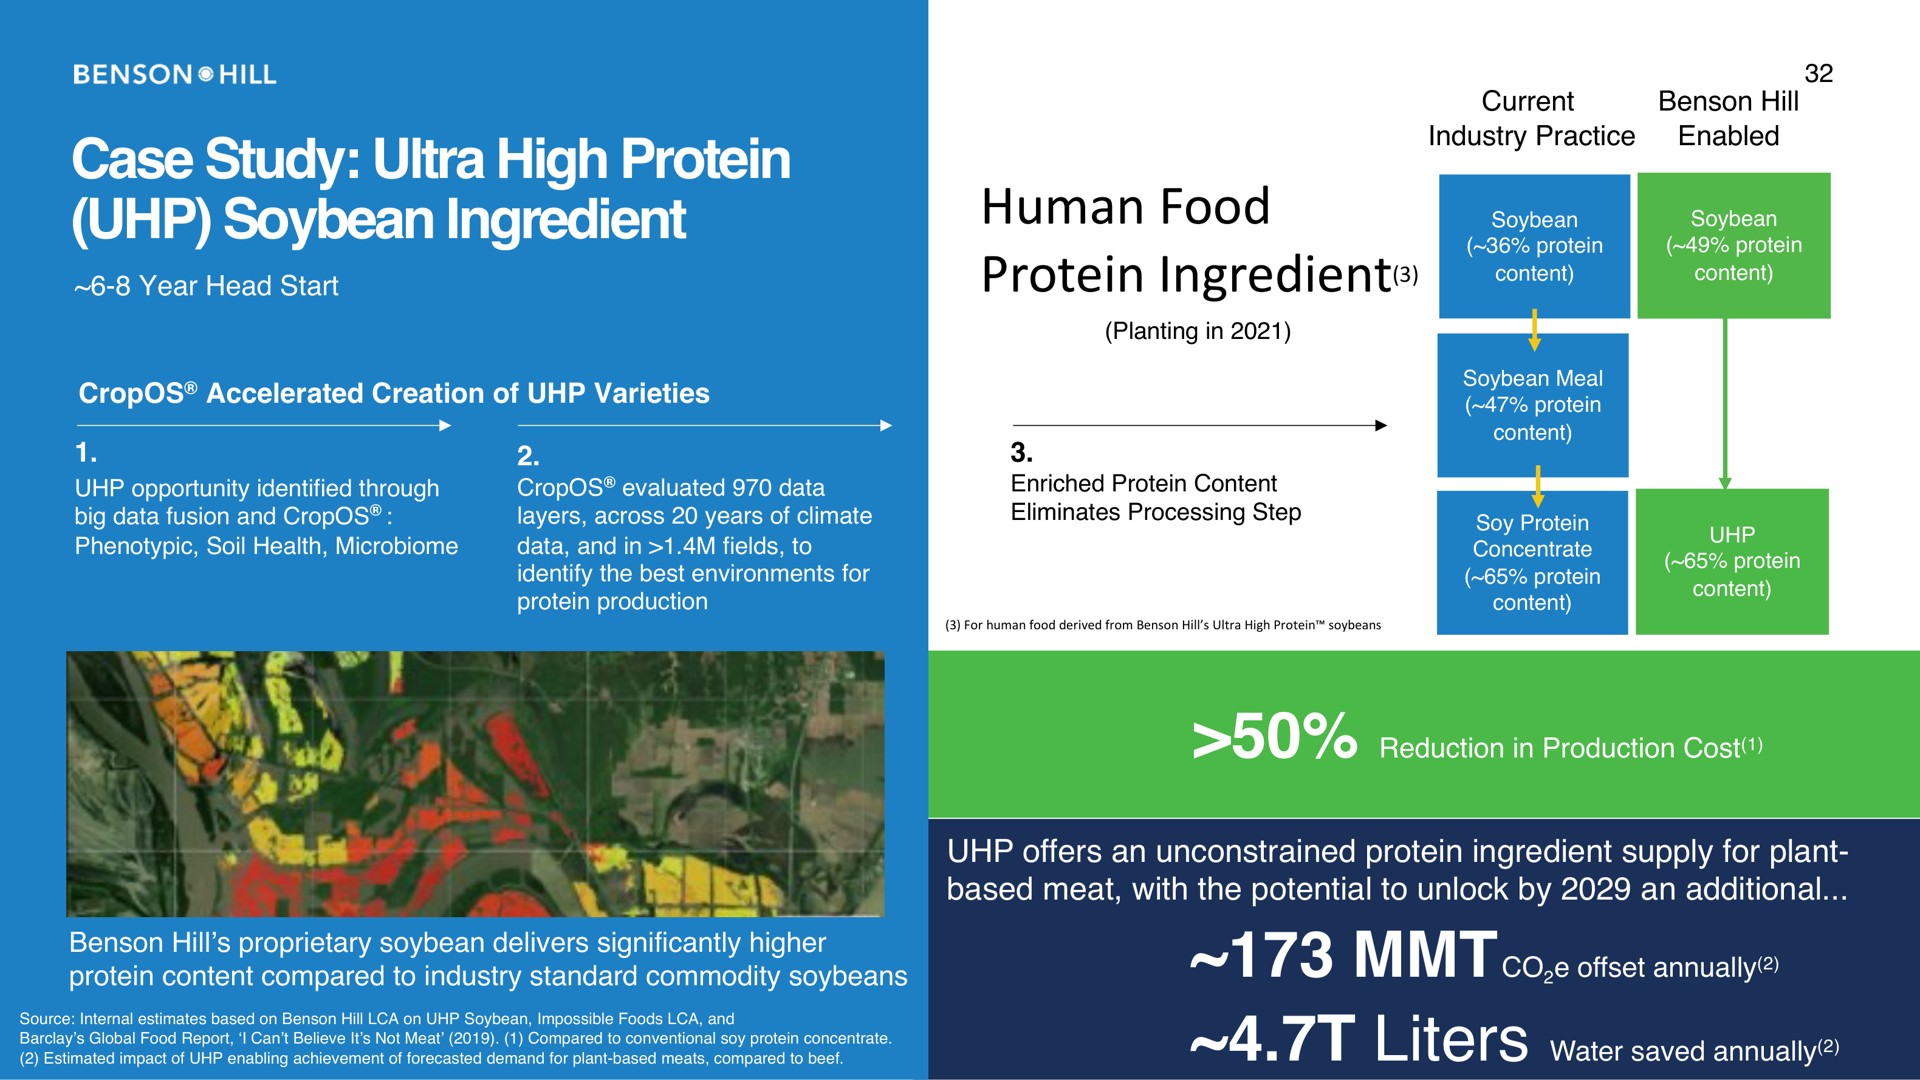 case study ultra high protein soybean ingredient human food protein ingredient on | Benson Hill